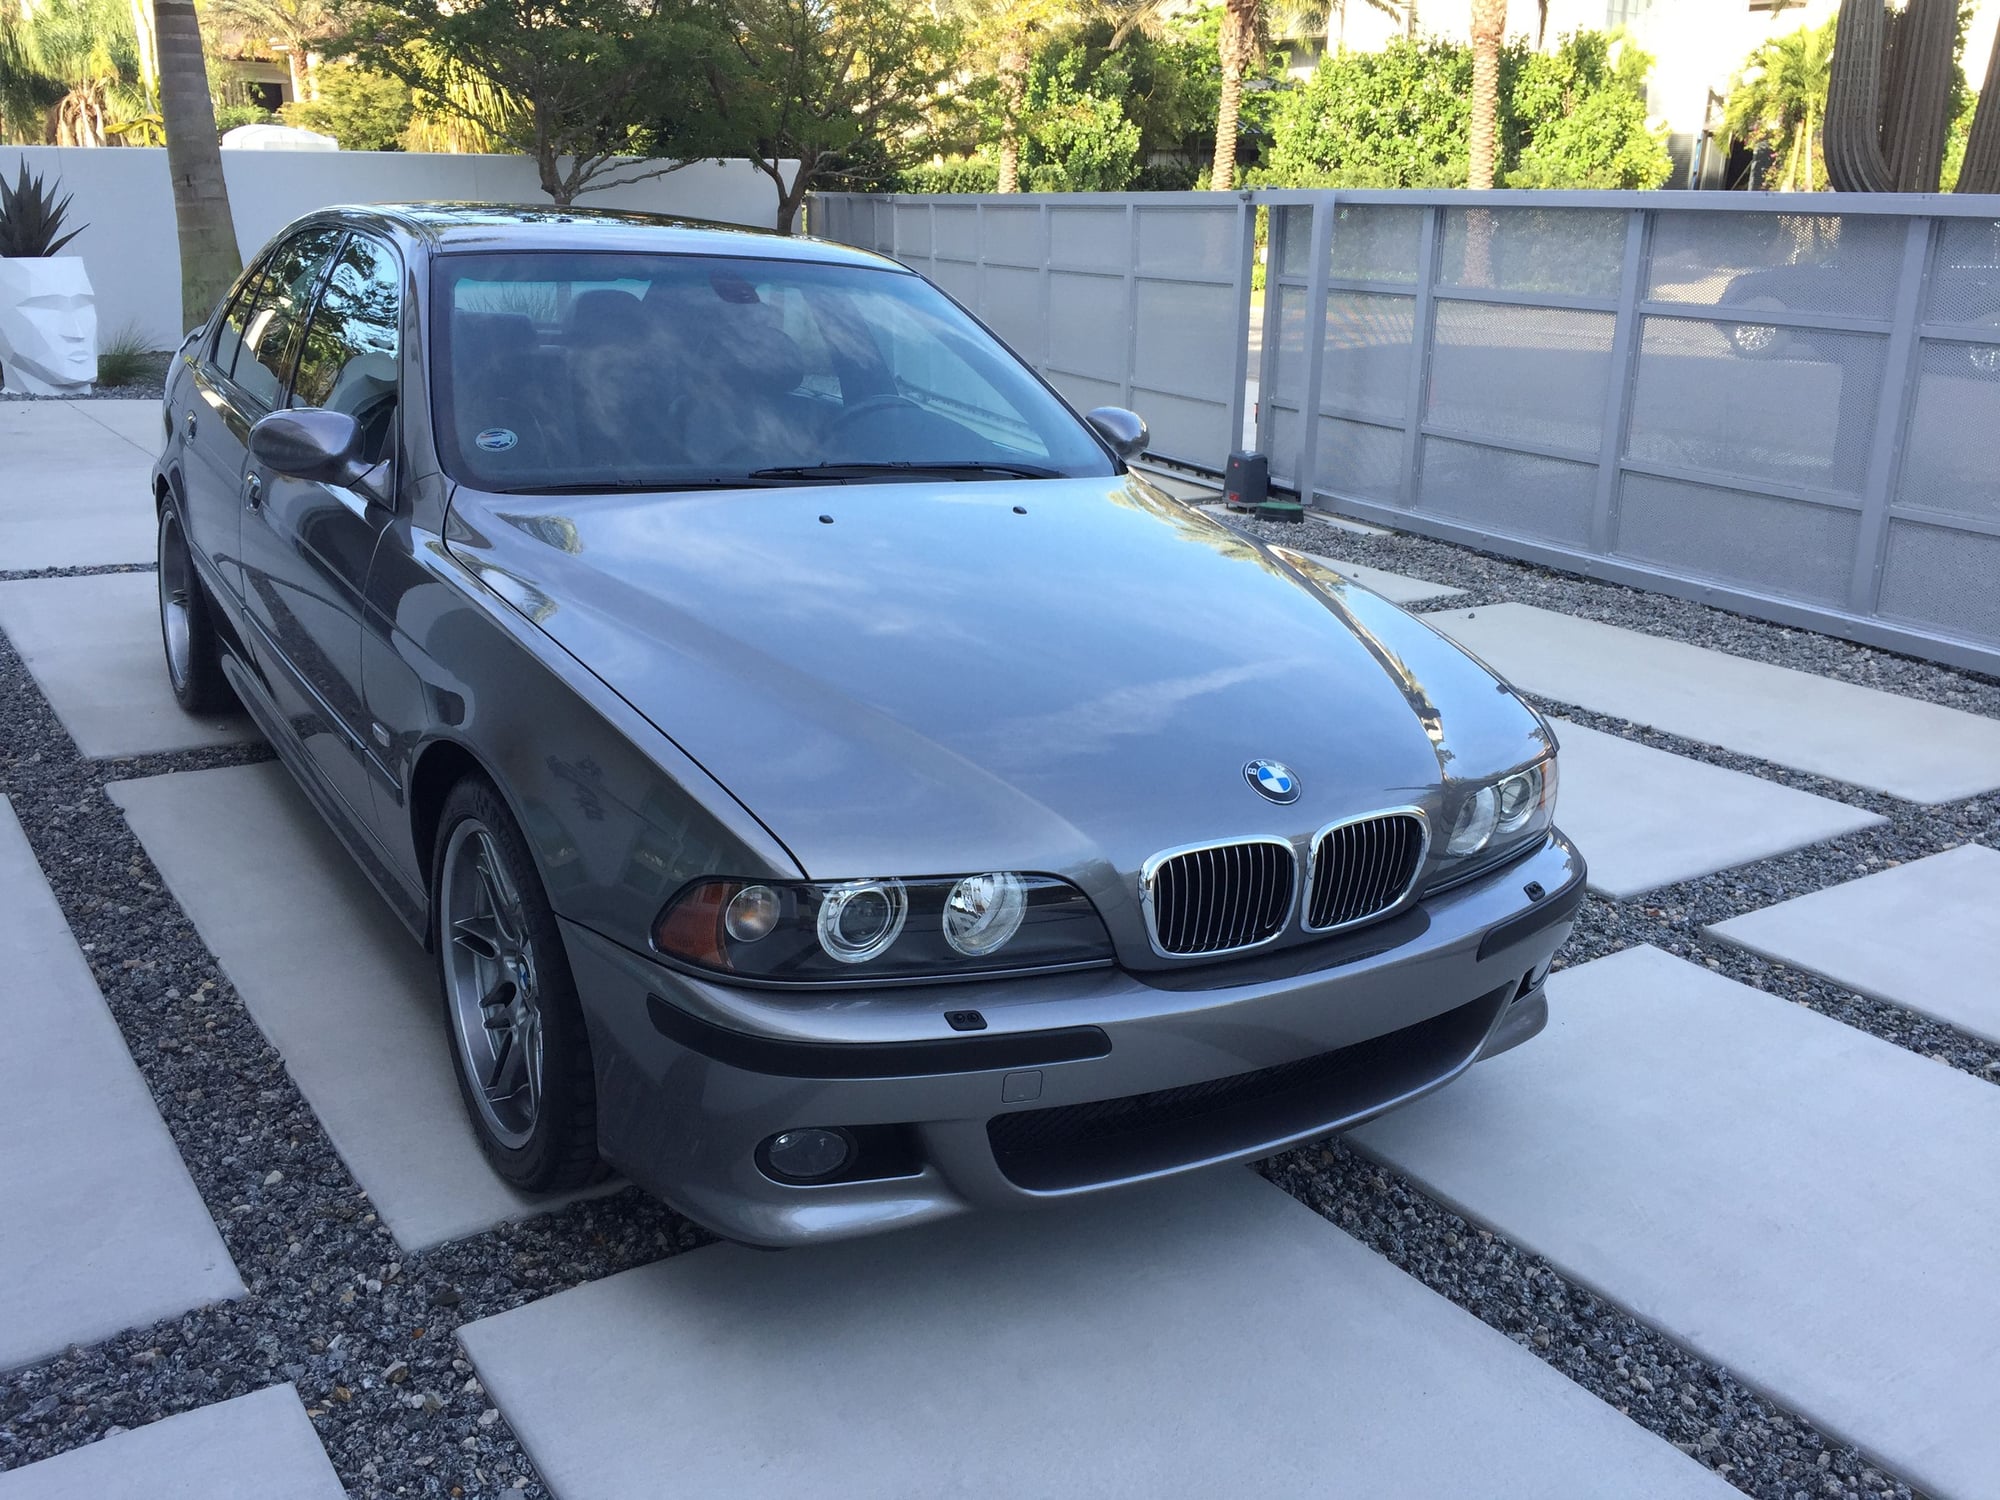 2002 BMW M5 - 2002 BMW E39 M5 Only 11,674 Miles !  Outstanding Stunning Original Stock Condition. - Used - VIN WBSDE93432BZ99753 - 8 cyl - 2WD - Manual - Sedan - Gray - Sarasota, FL 34239, United States